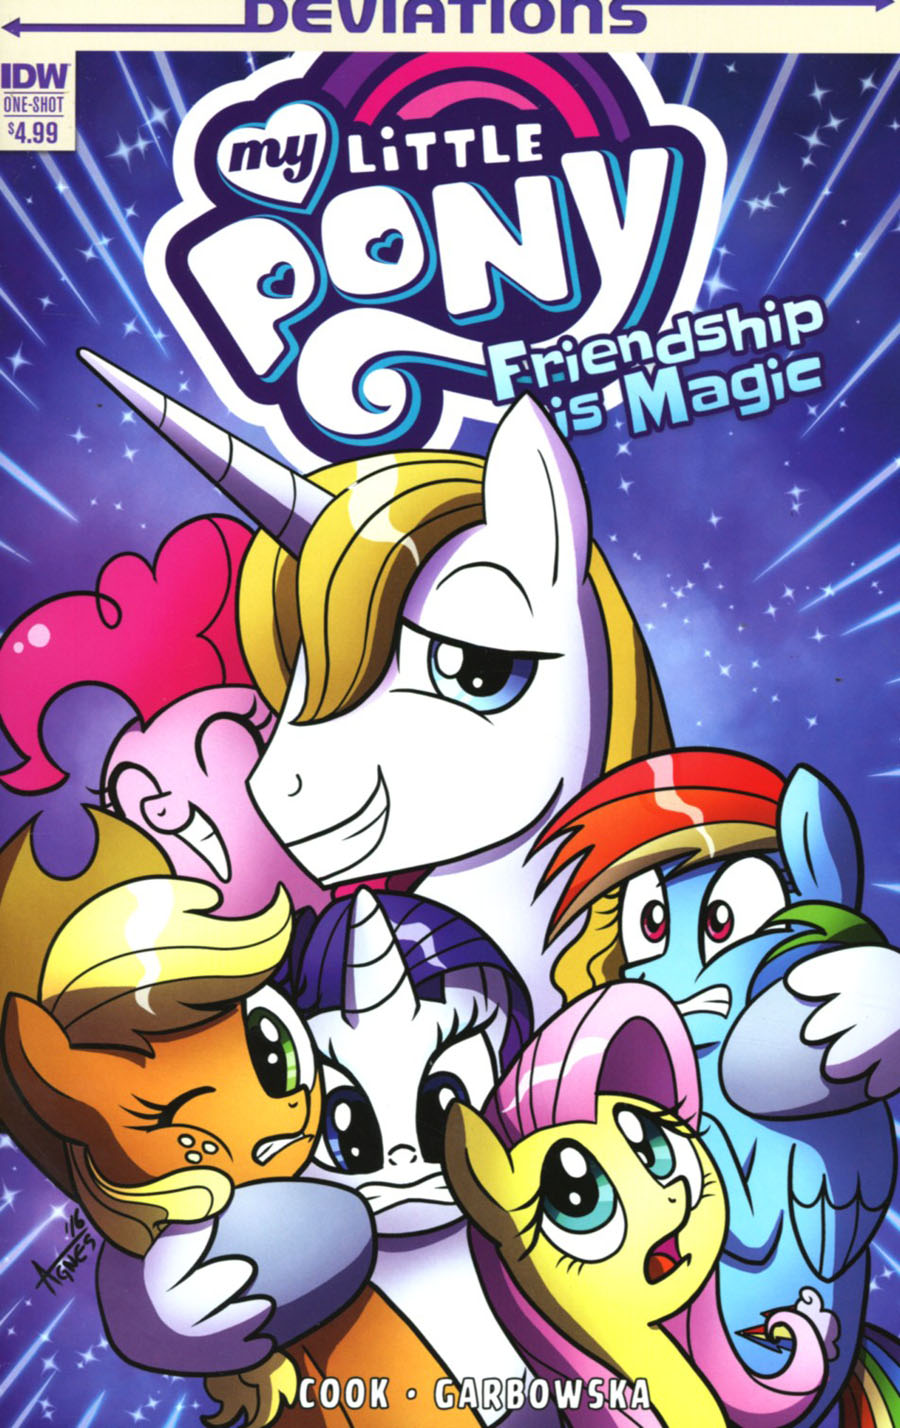 My Little Pony Friendship Is Magic Deviations One Shot Cover A Regular Agnes Garbowska Cover